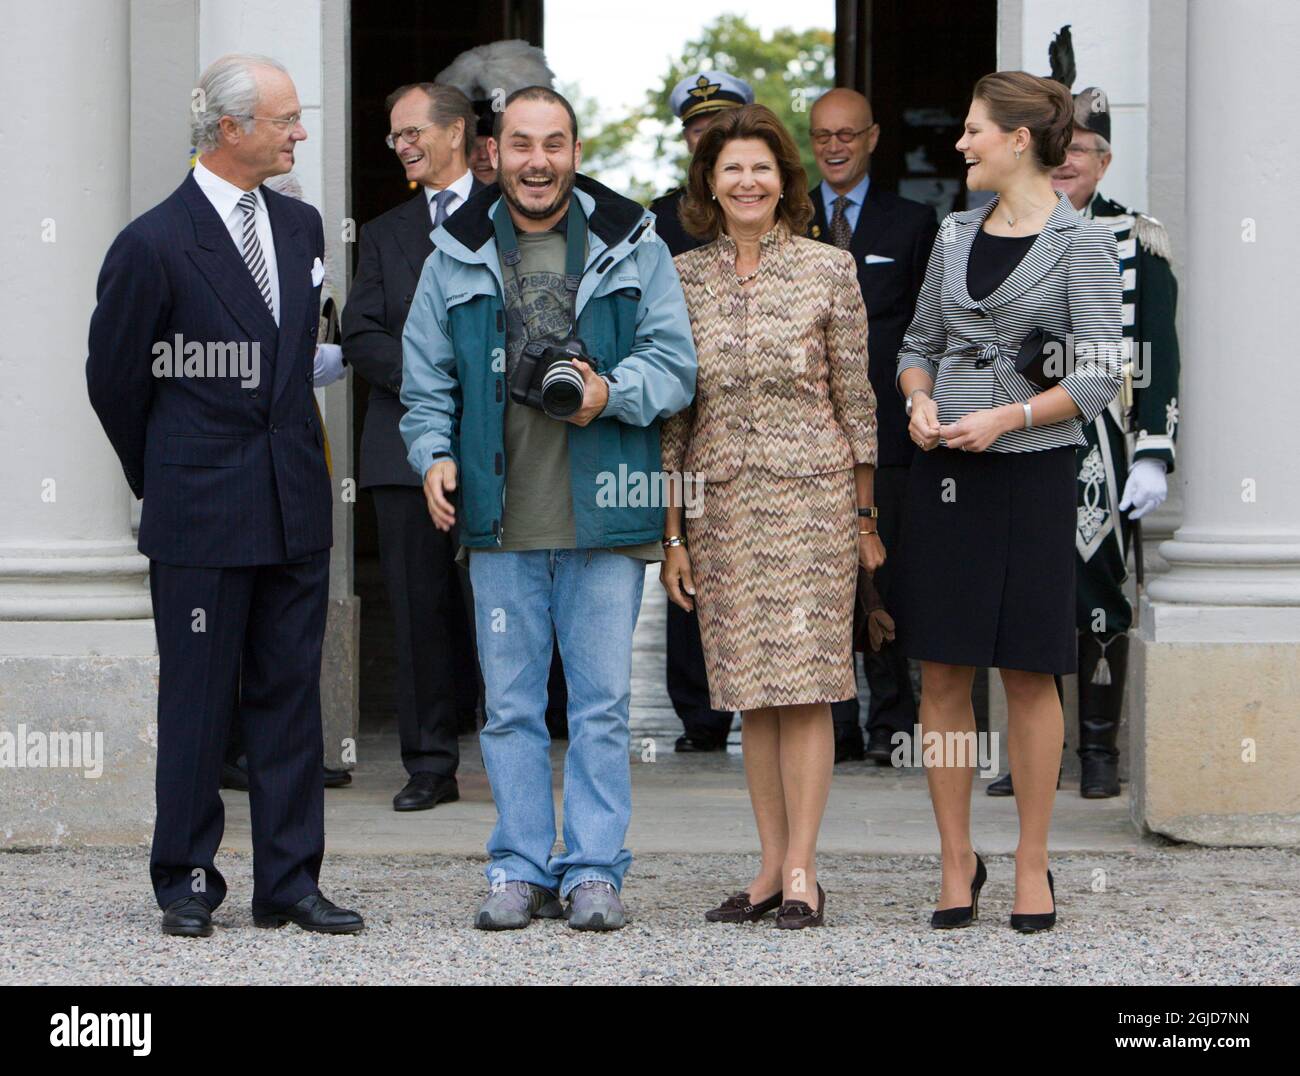 King Carl XVI Gustaf, Queen Silvia and Crown Princess Victoria was joined by Brazilian photographer Beto Barata when pictures was taken at Rosersberg castle outside Stockholm. He asked in portugese if he could join them and the queen gave her approval.   Stock Photo